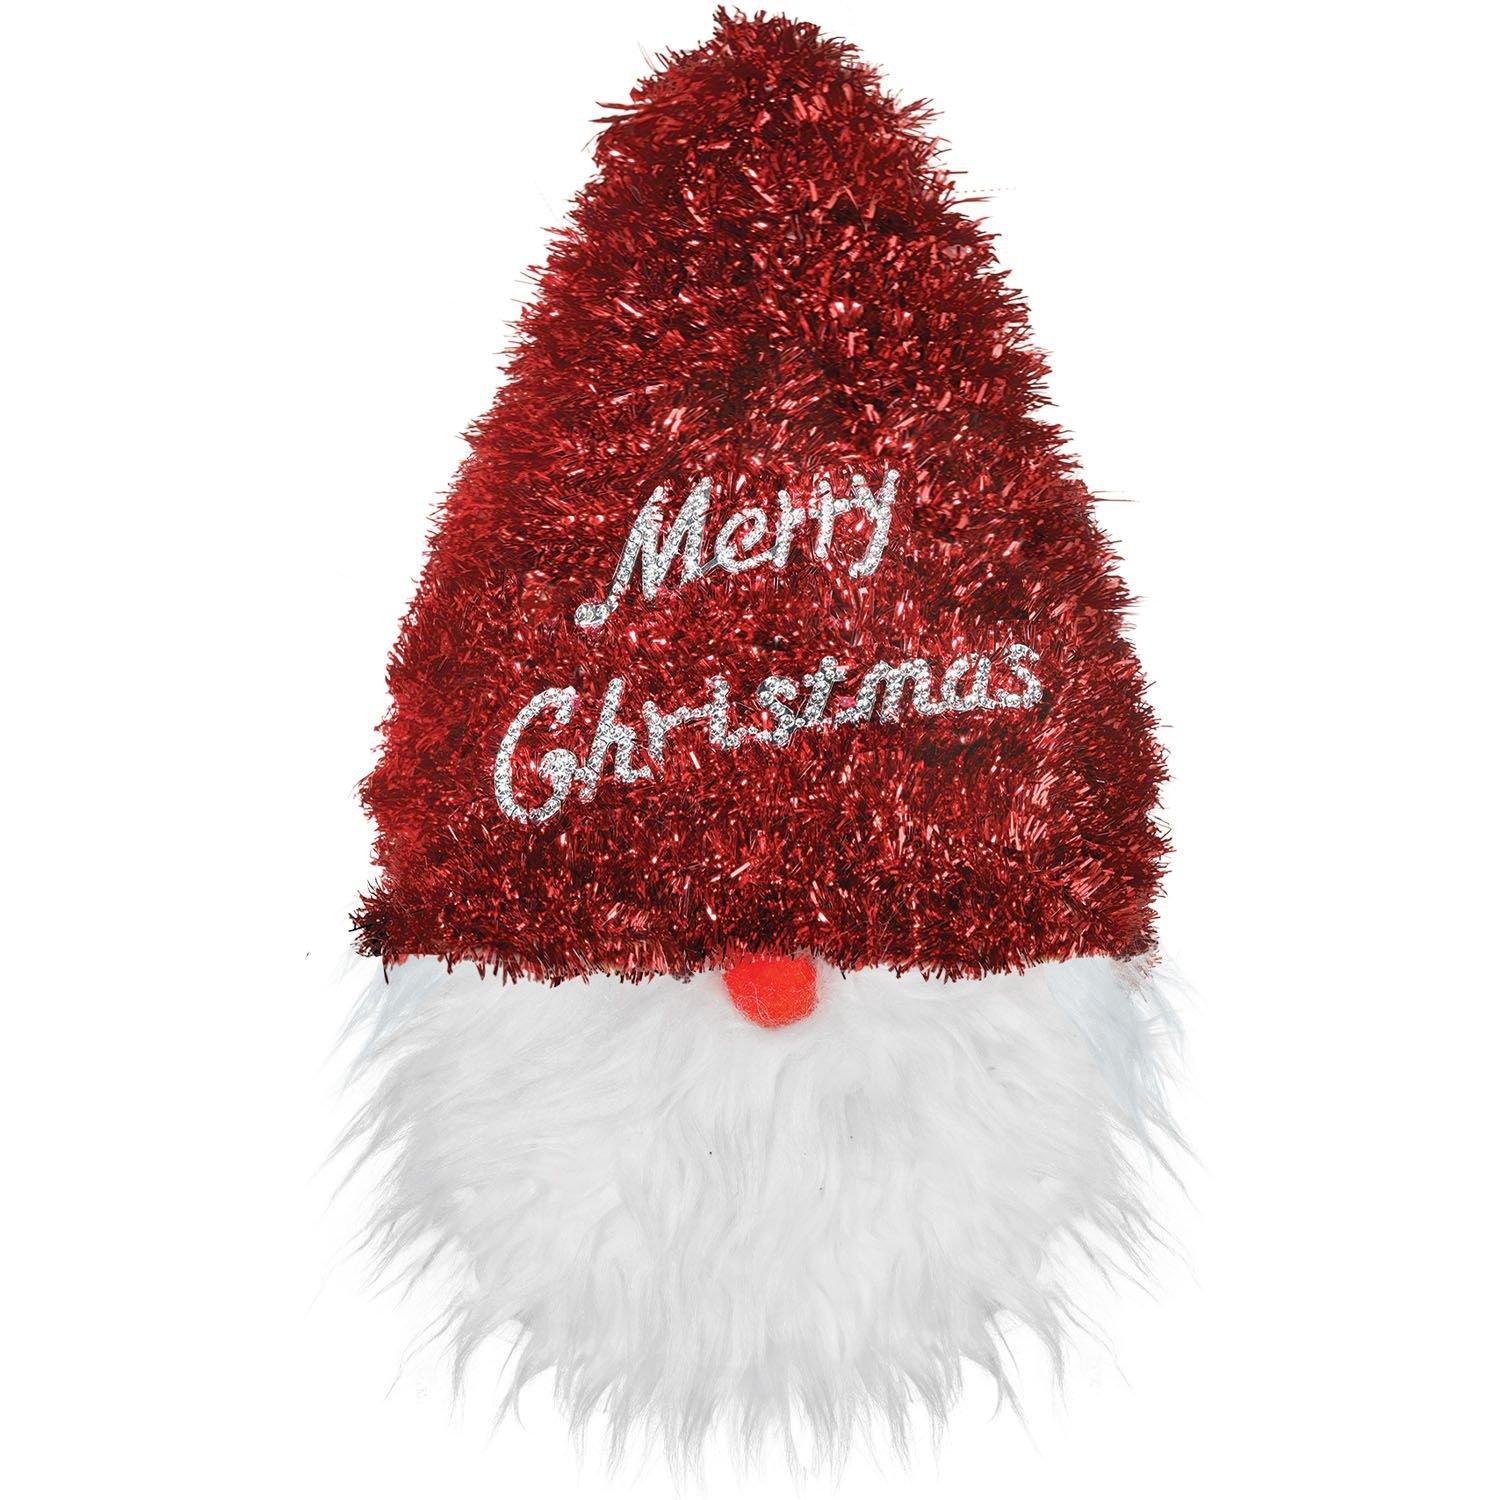 Santa Gnome 3D Tinsel Christmas Decoration, 9.5in x 15.25in ...